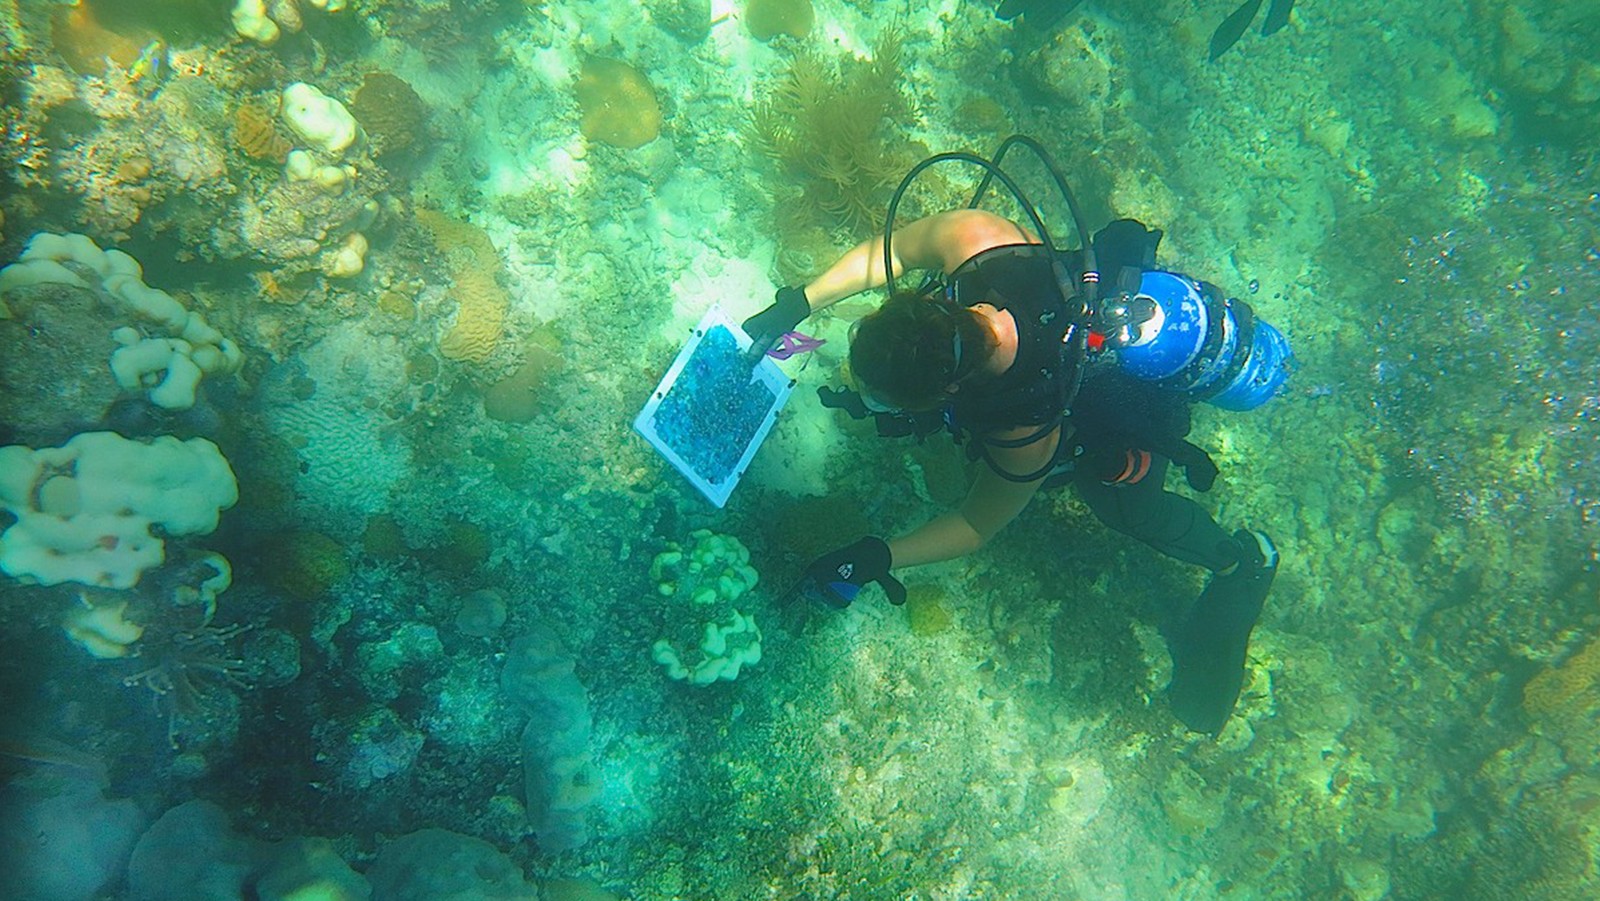 An AOML coral researcher uses a photo mosaic to locate a bleached coral head on a reef in the Florida Keys. Image credit: NOAA